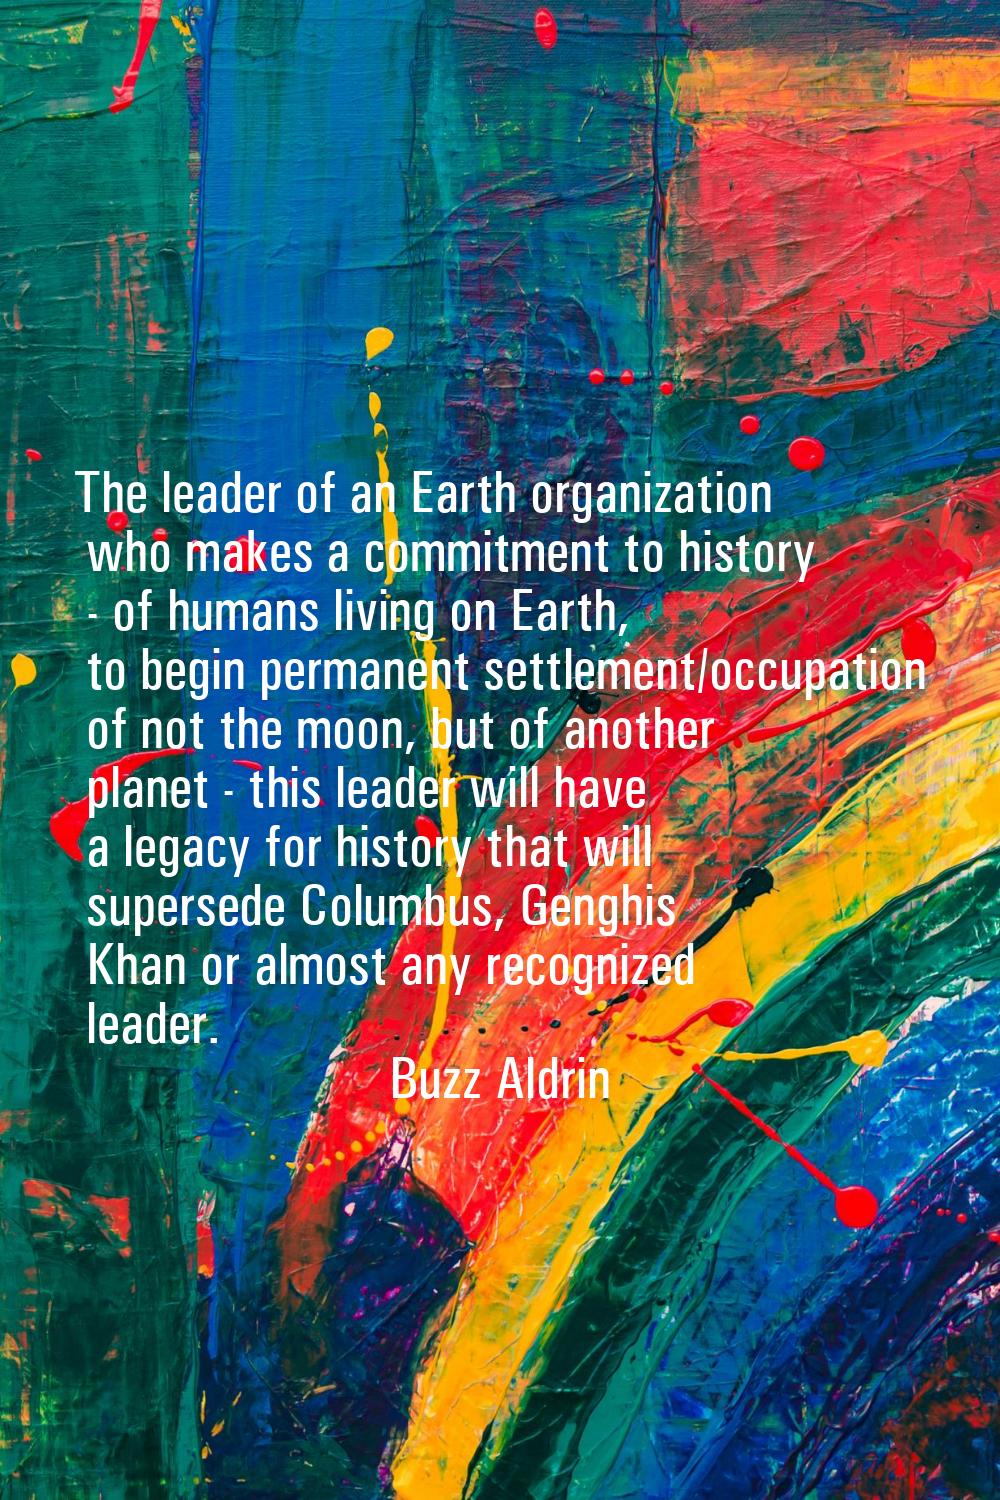 The leader of an Earth organization who makes a commitment to history - of humans living on Earth, 